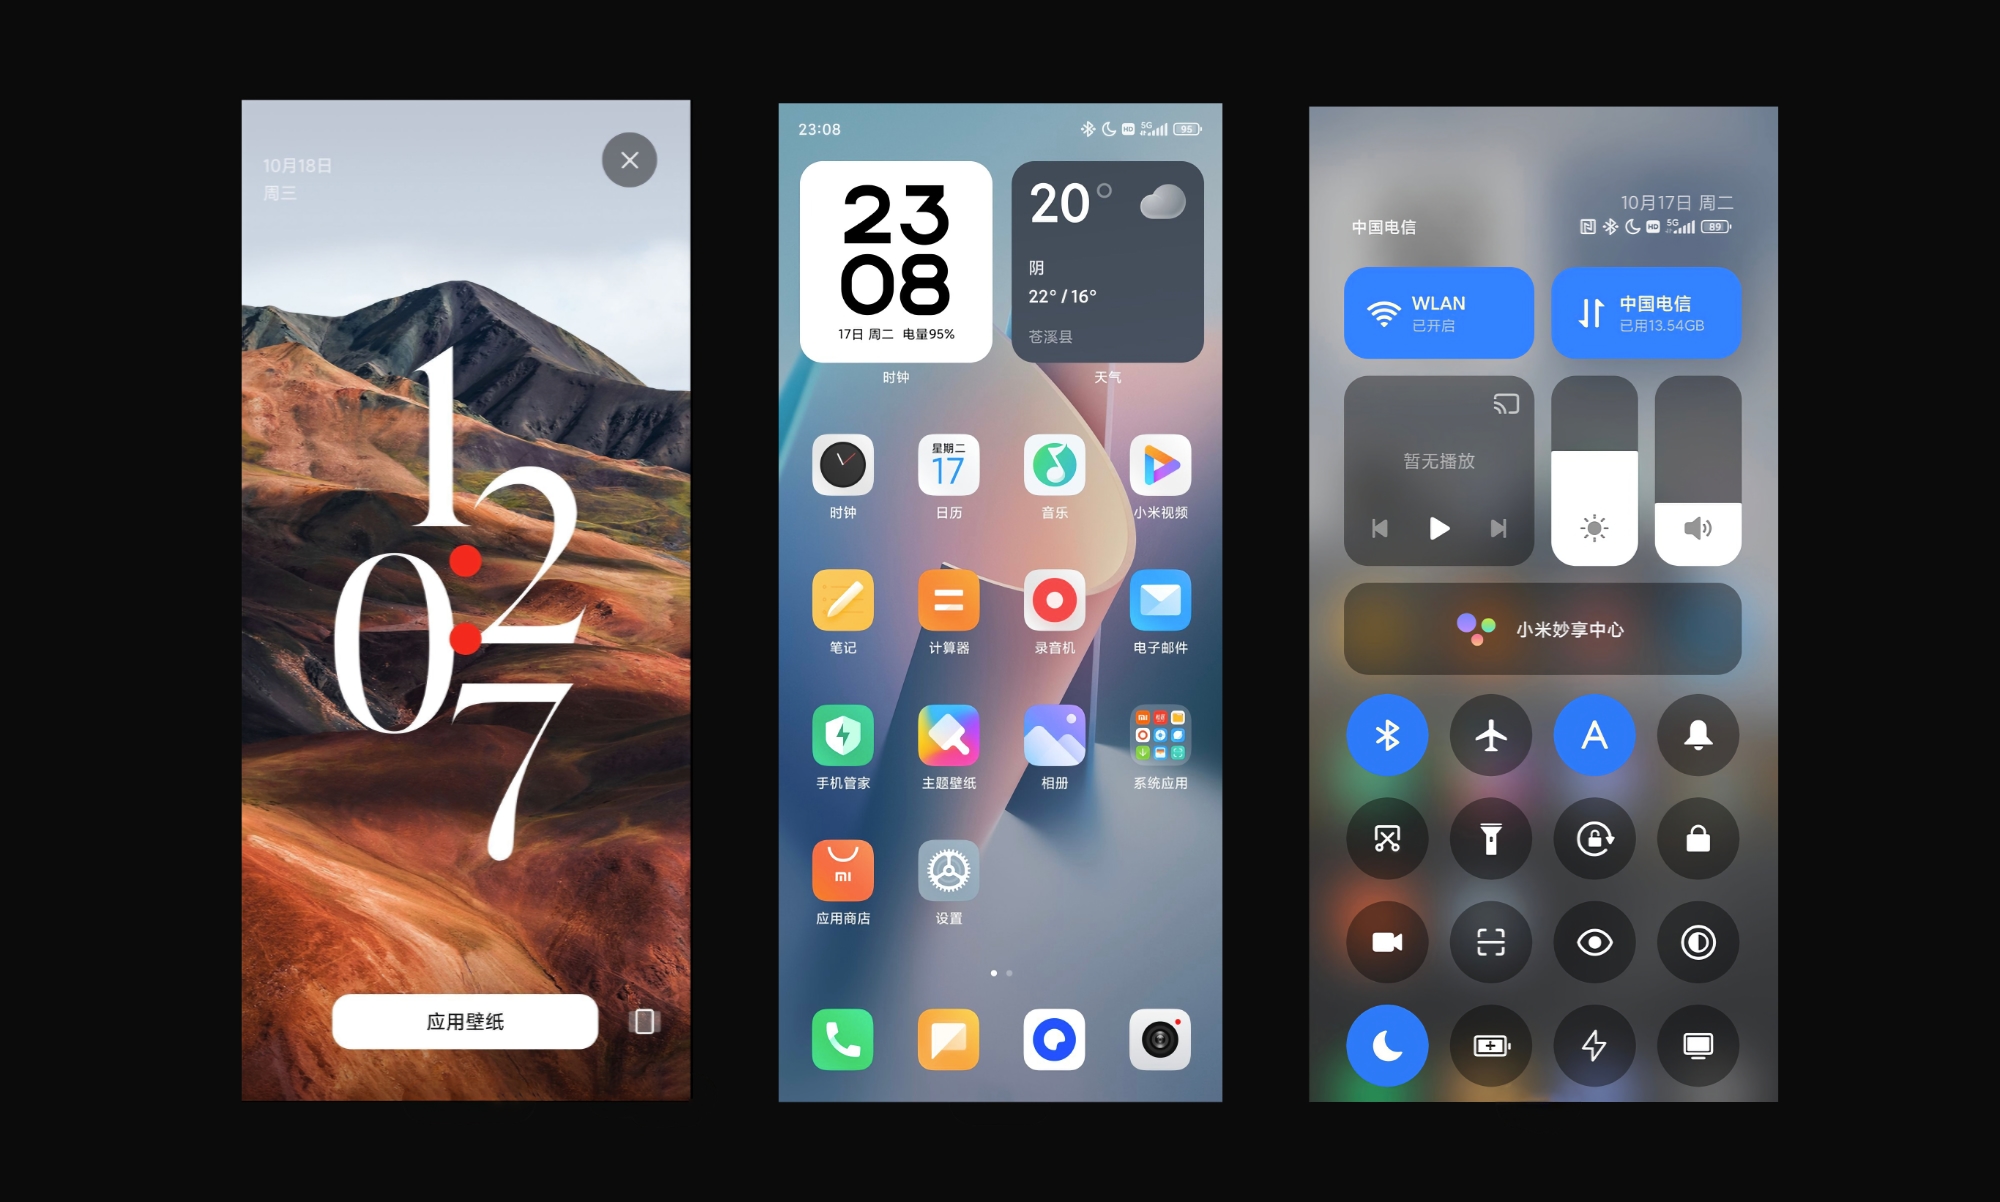 Here's what HyperOS will look like: a new operating system for Xiaomi devices